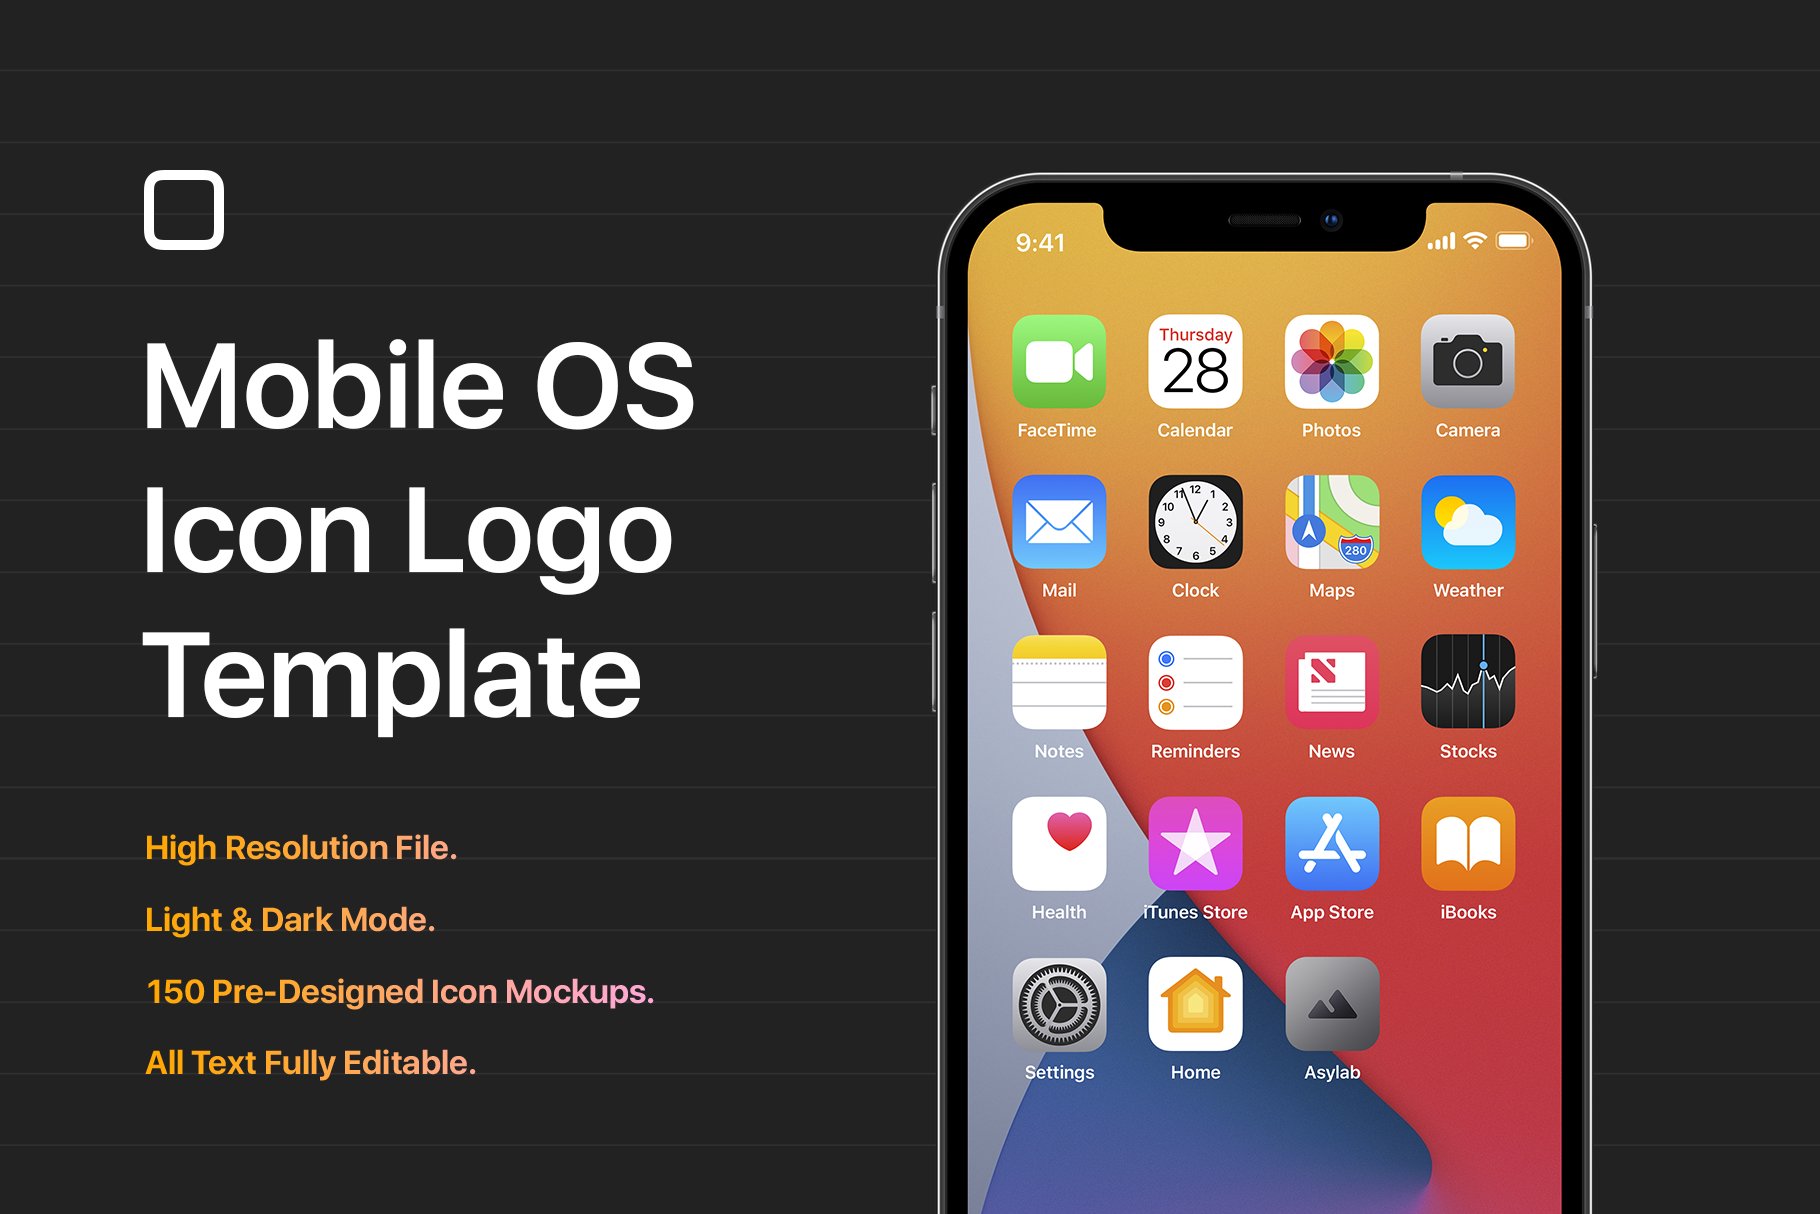 Mobile OS Icon Template Mockup - PSD cover image.